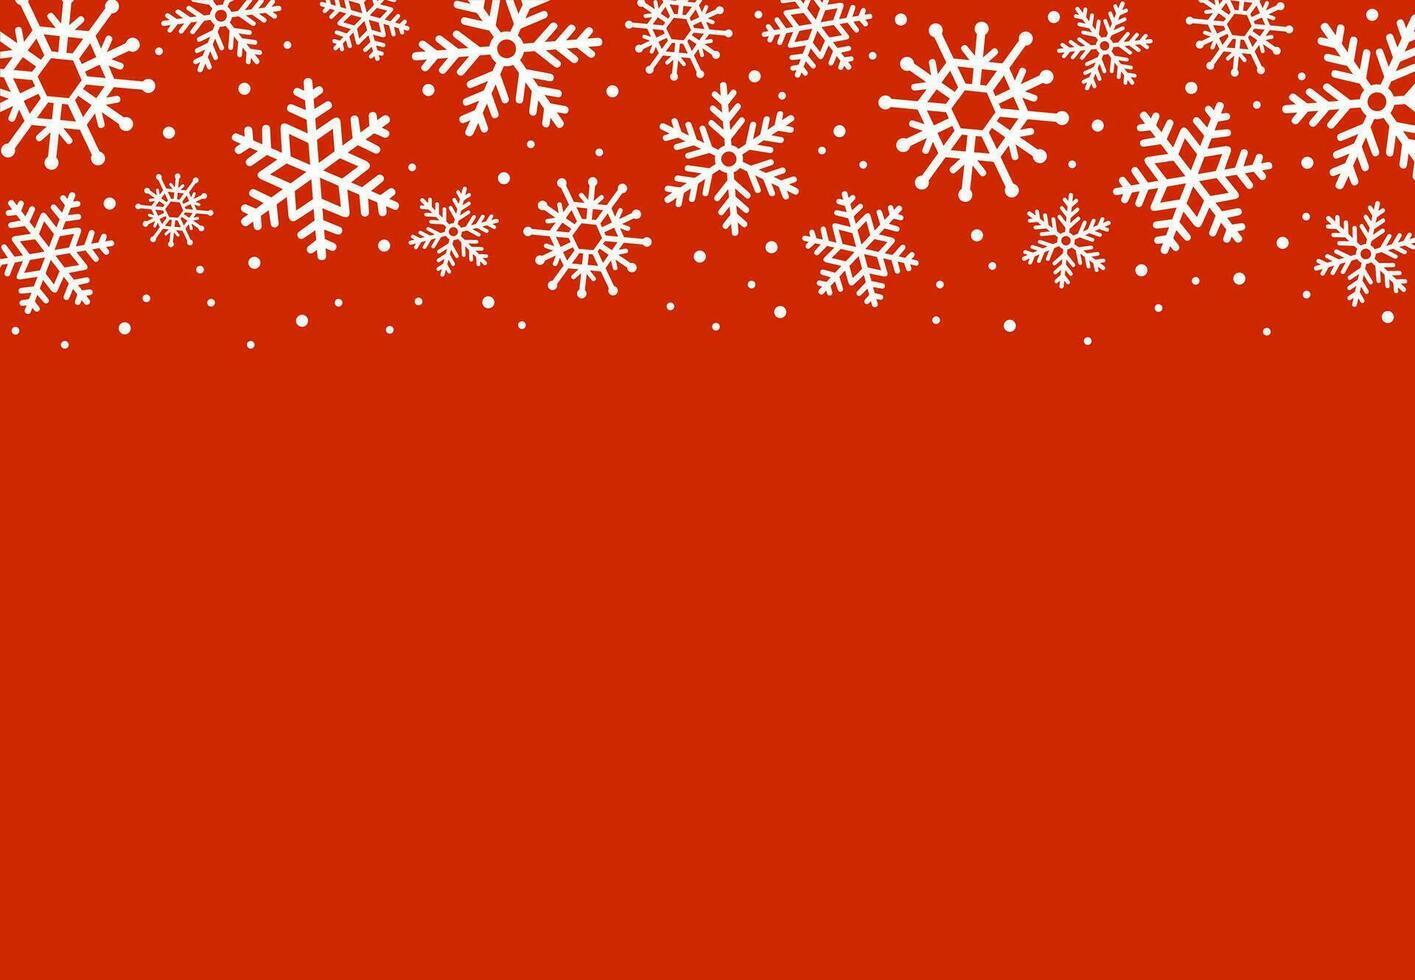 Christmas red background with snowflakes. Holiday card or greeting card. Happy New Year vector illustration.